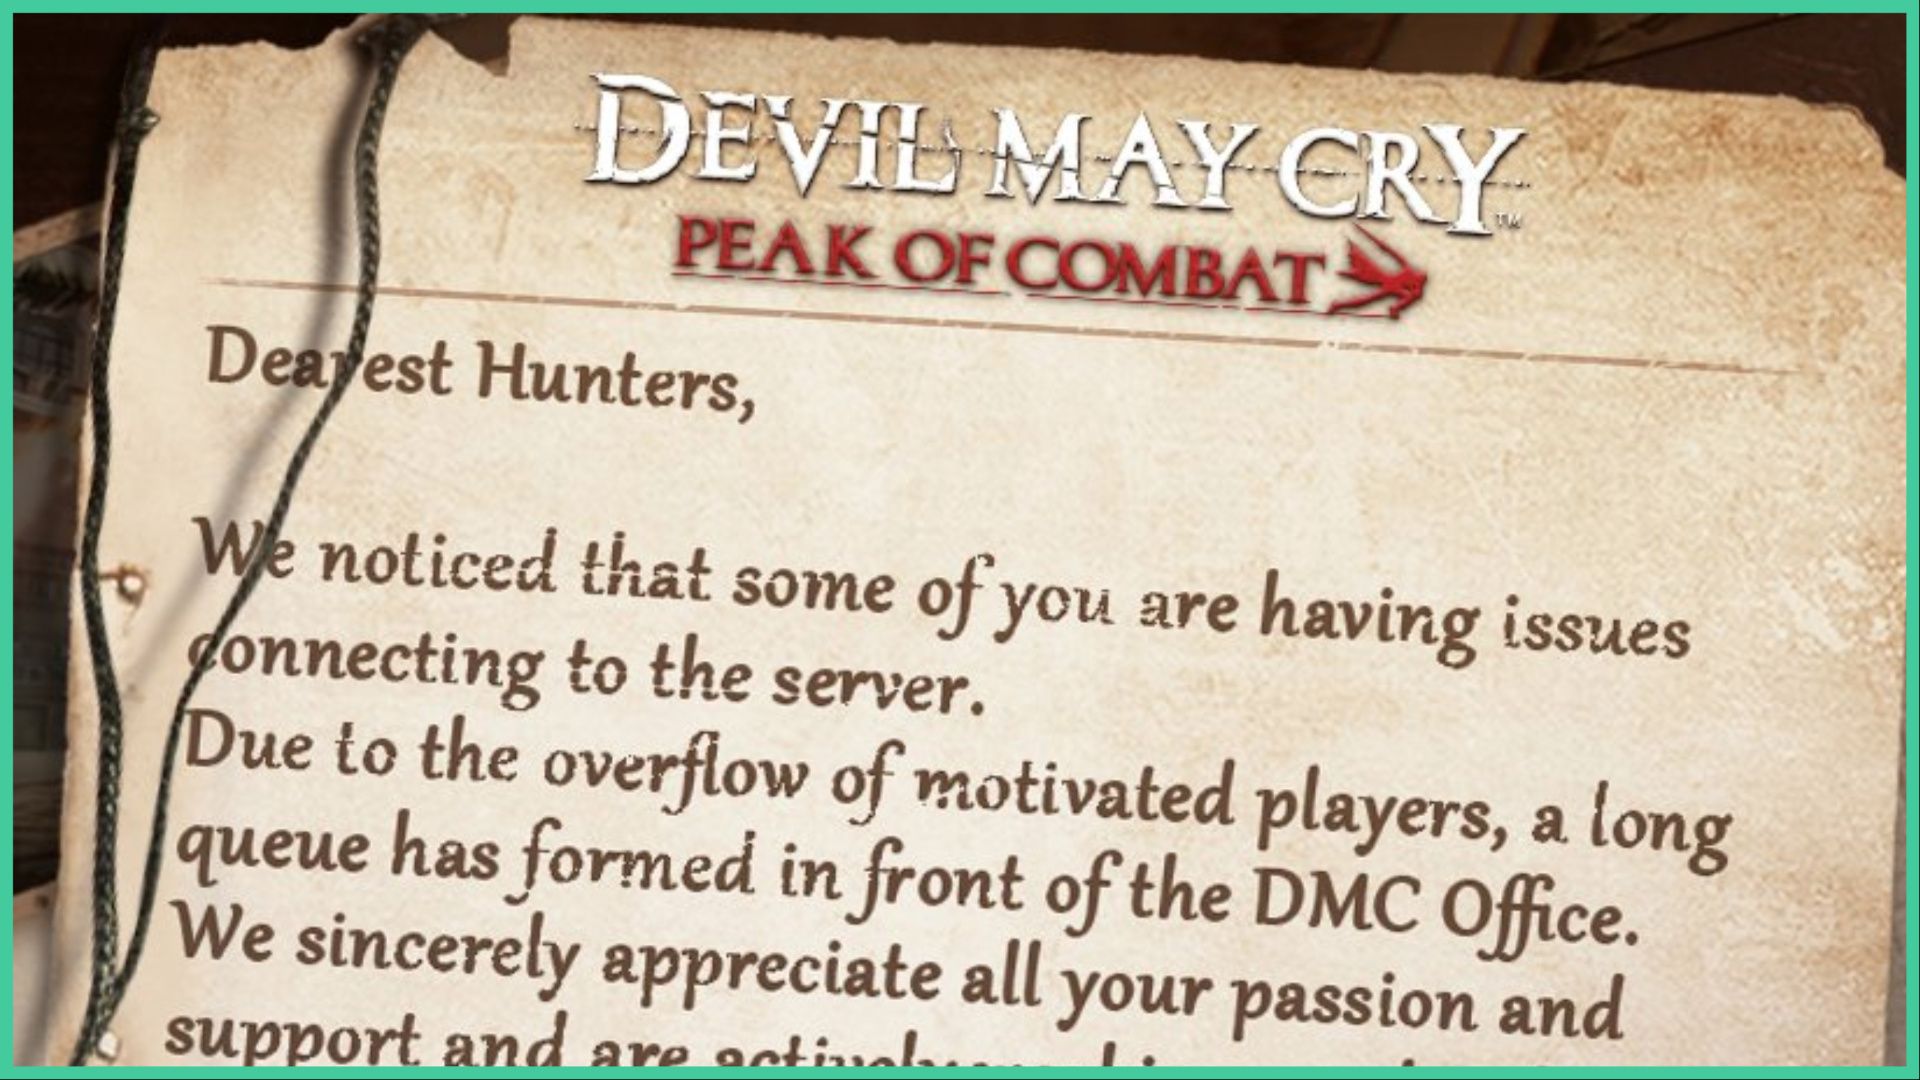 feature image for our devil may cry peak of combat login problem guide, the image features an image that was posted on the official twitter page for the game which is of a ripped and dirty piece of paper that has the game's logo at the top, with text underneath that reads "dearest hunters, we noticed that some of you are having issues connecting to the server. due to the overflow of motivated players, a long queue has formed in front of the DMC office. we sincerely appreciate all your passion and support"